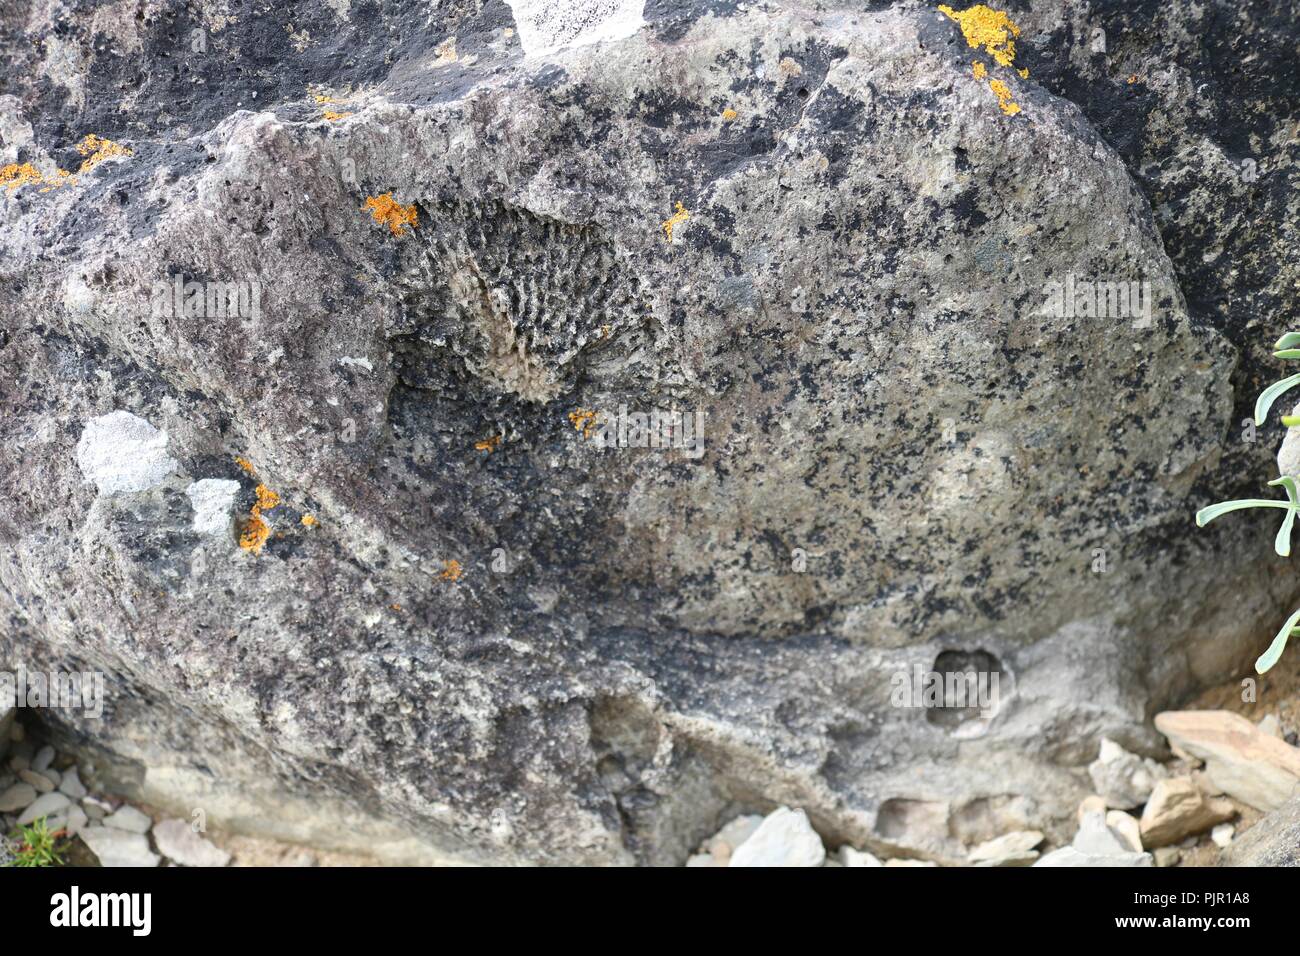 Tabulate coral fossil at Ferriter's cove Stock Photo - Alamy